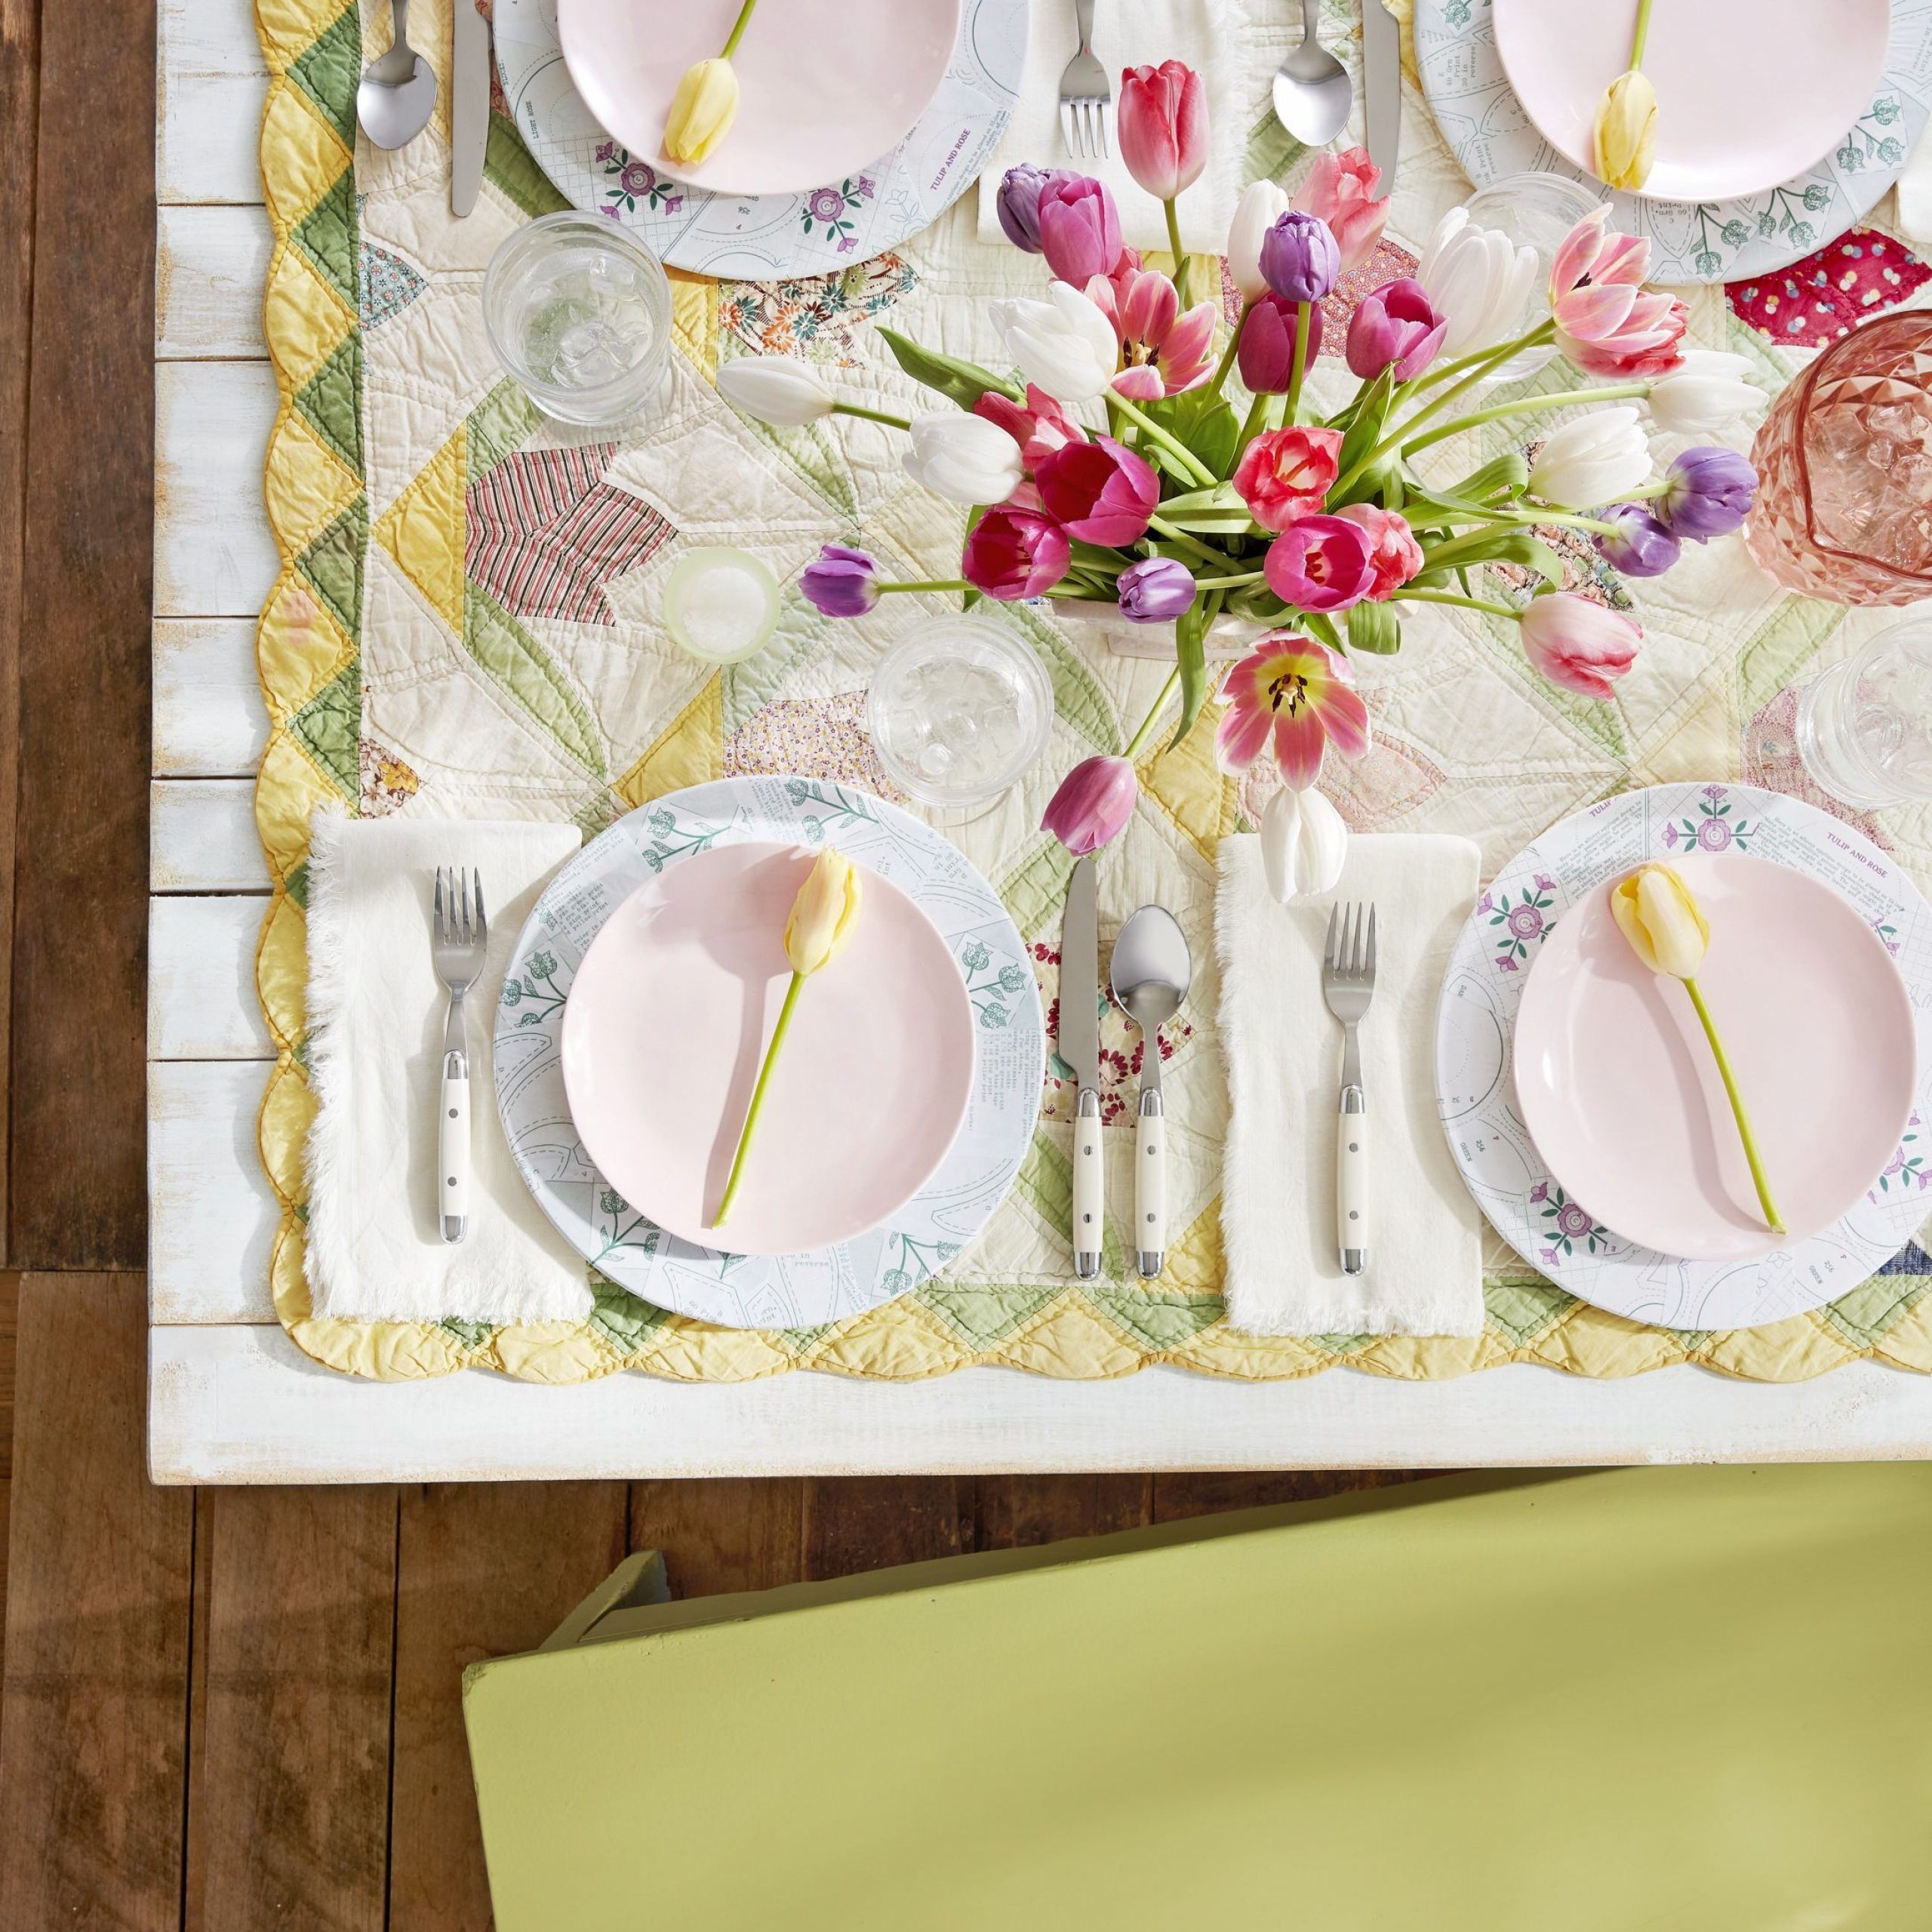 57 Spring Centerpieces And Table Decorations – Ideas For Throughout 2017 Blended Fabric Spring Party Wall Hangings (View 1 of 20)